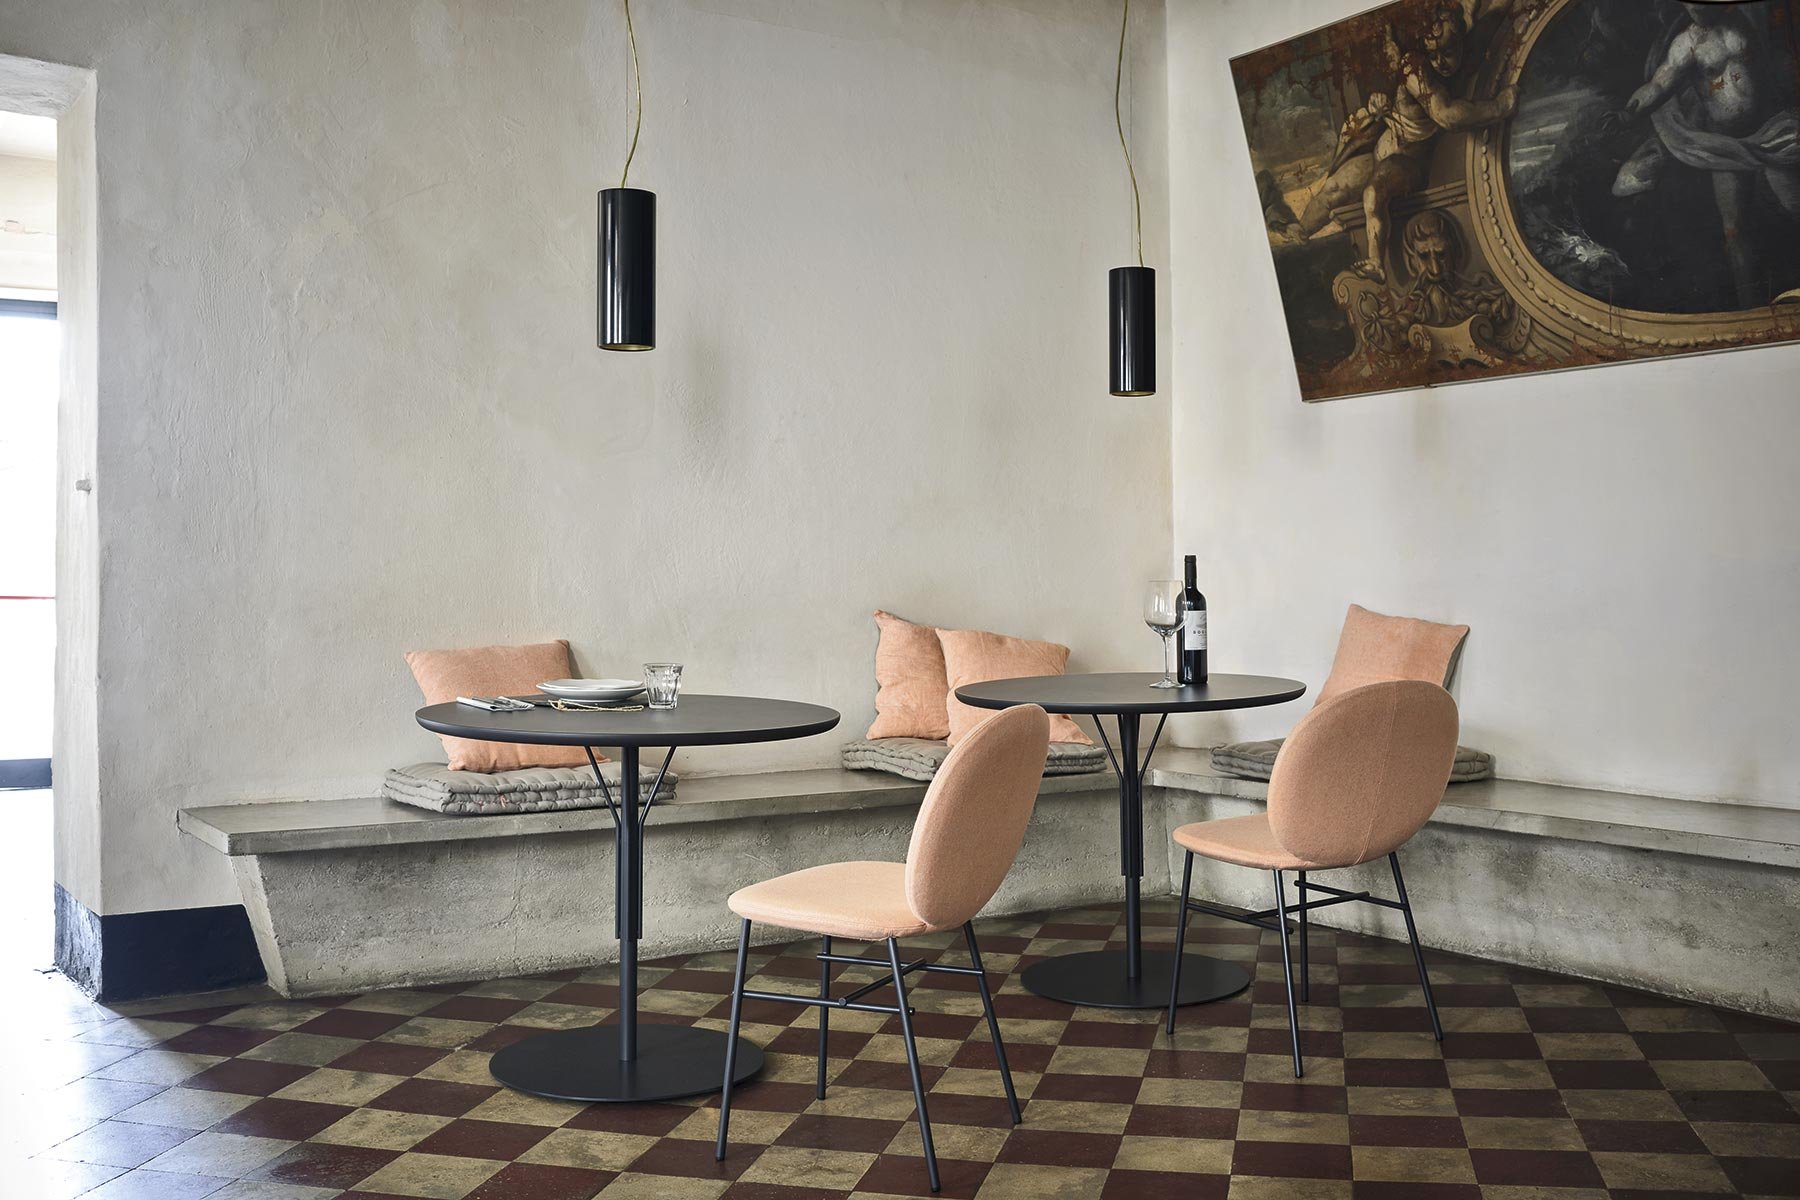 Kelly T Dining Table from Tacchini, designed by Claesson Koivisto Rune